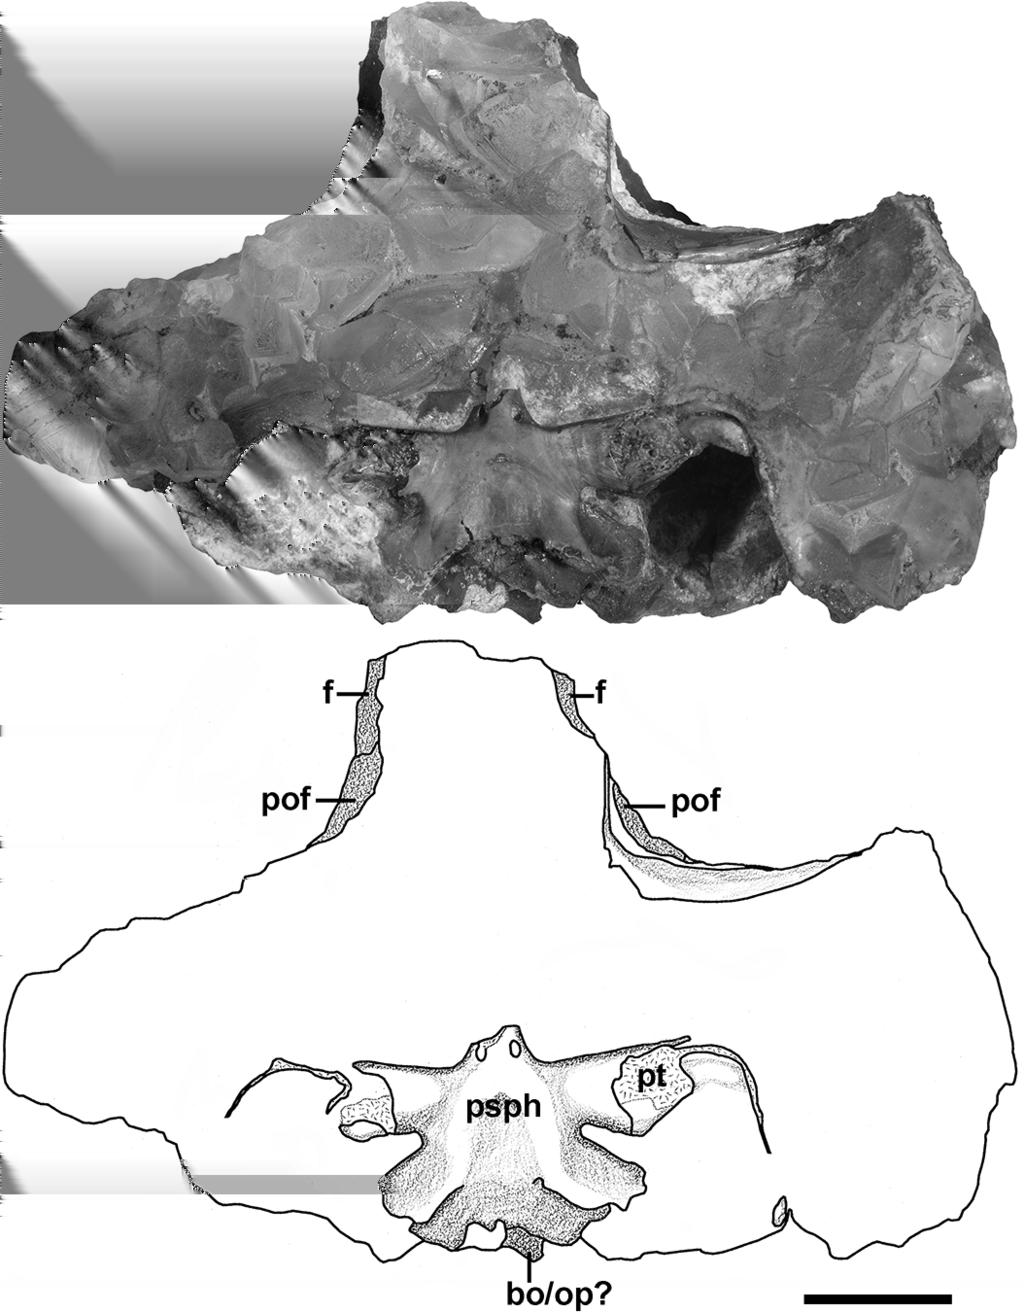 N. B. Fröbisch et al.: Large specimen of the dissorophid Cacops woehri 77 Figure 4. Photo and drawing of the skull of the new specimen of Cacops woehri BMRP 2007.3.5 in ventral view.